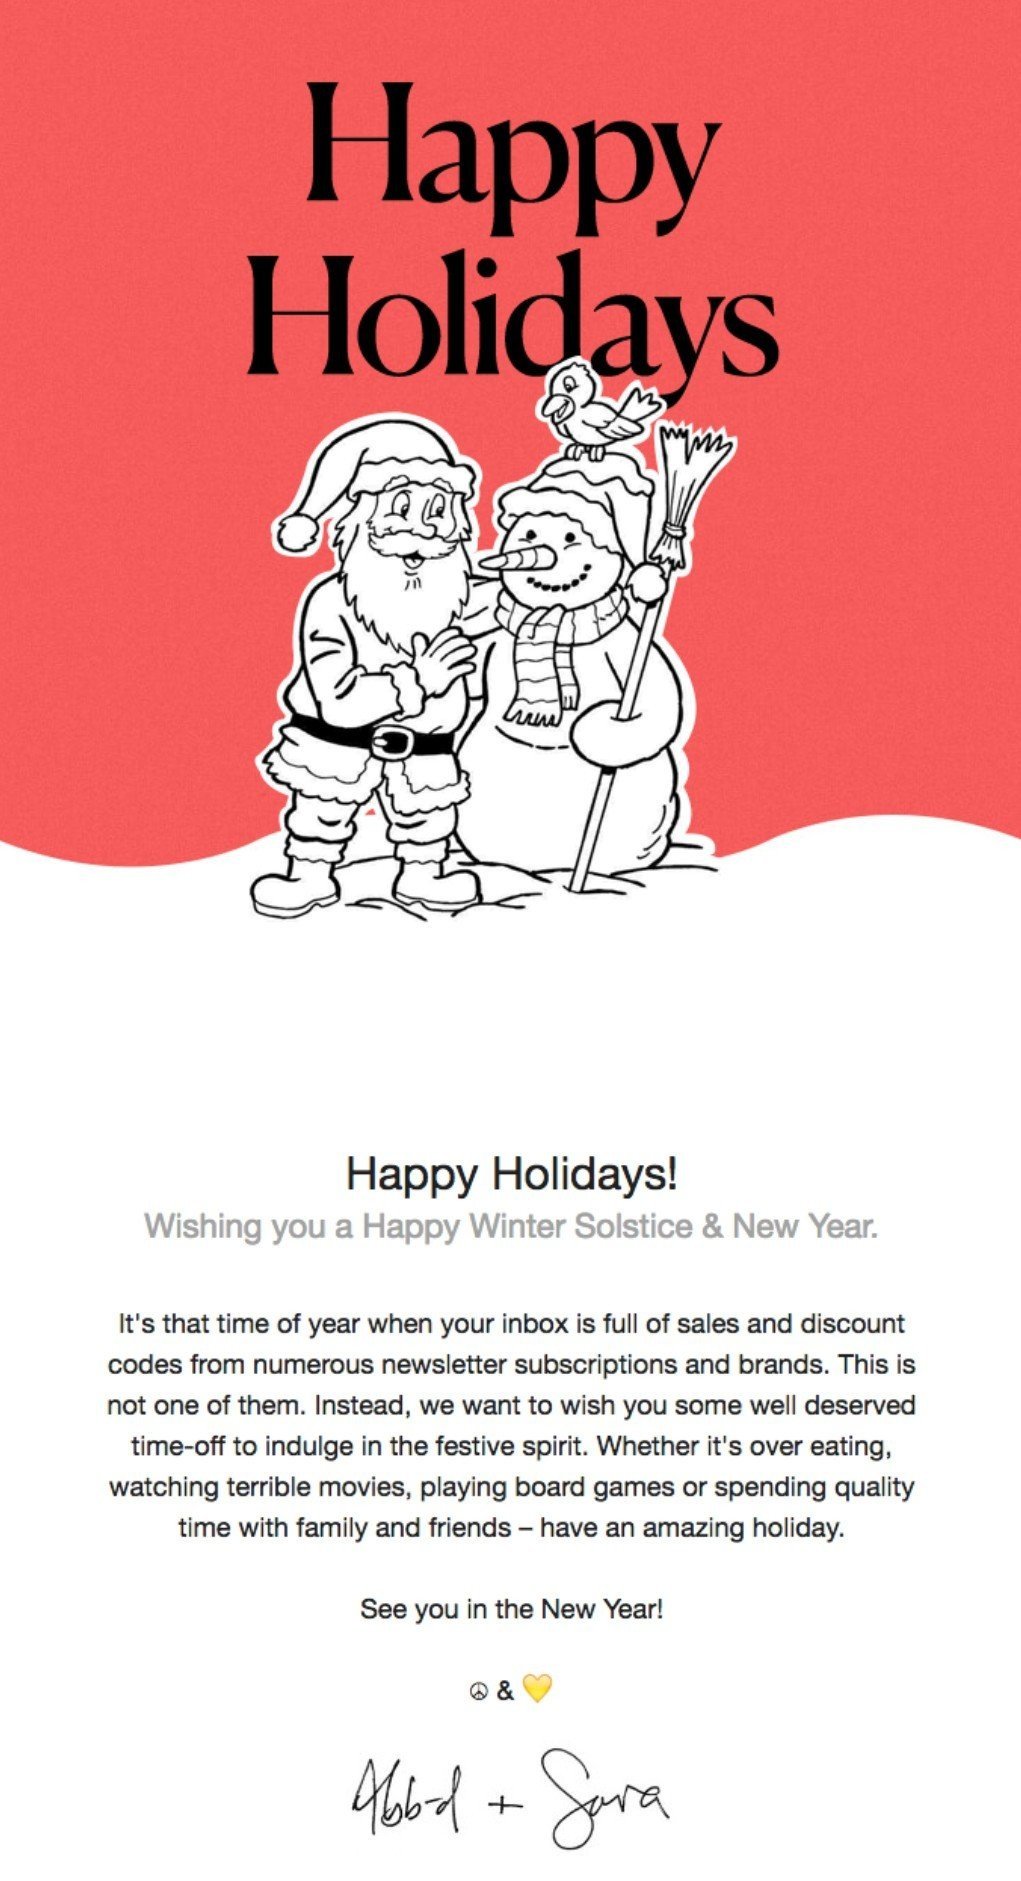 Personal Signature in Christmas Newsletters